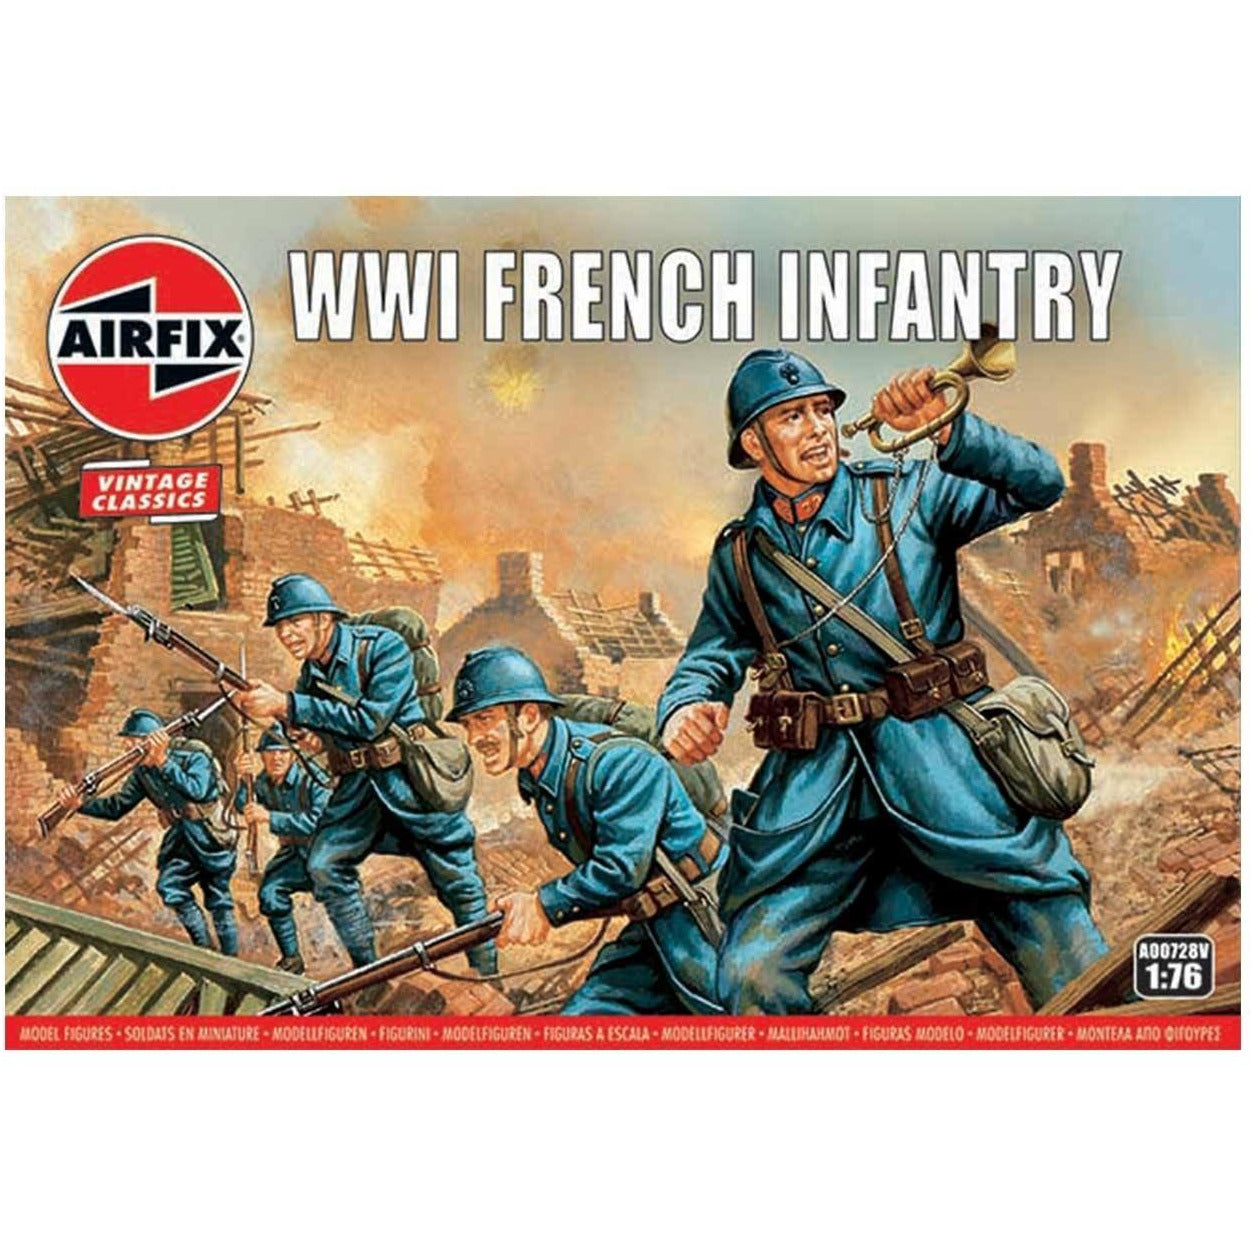 WWI French Infantry 1/76 by Airfix